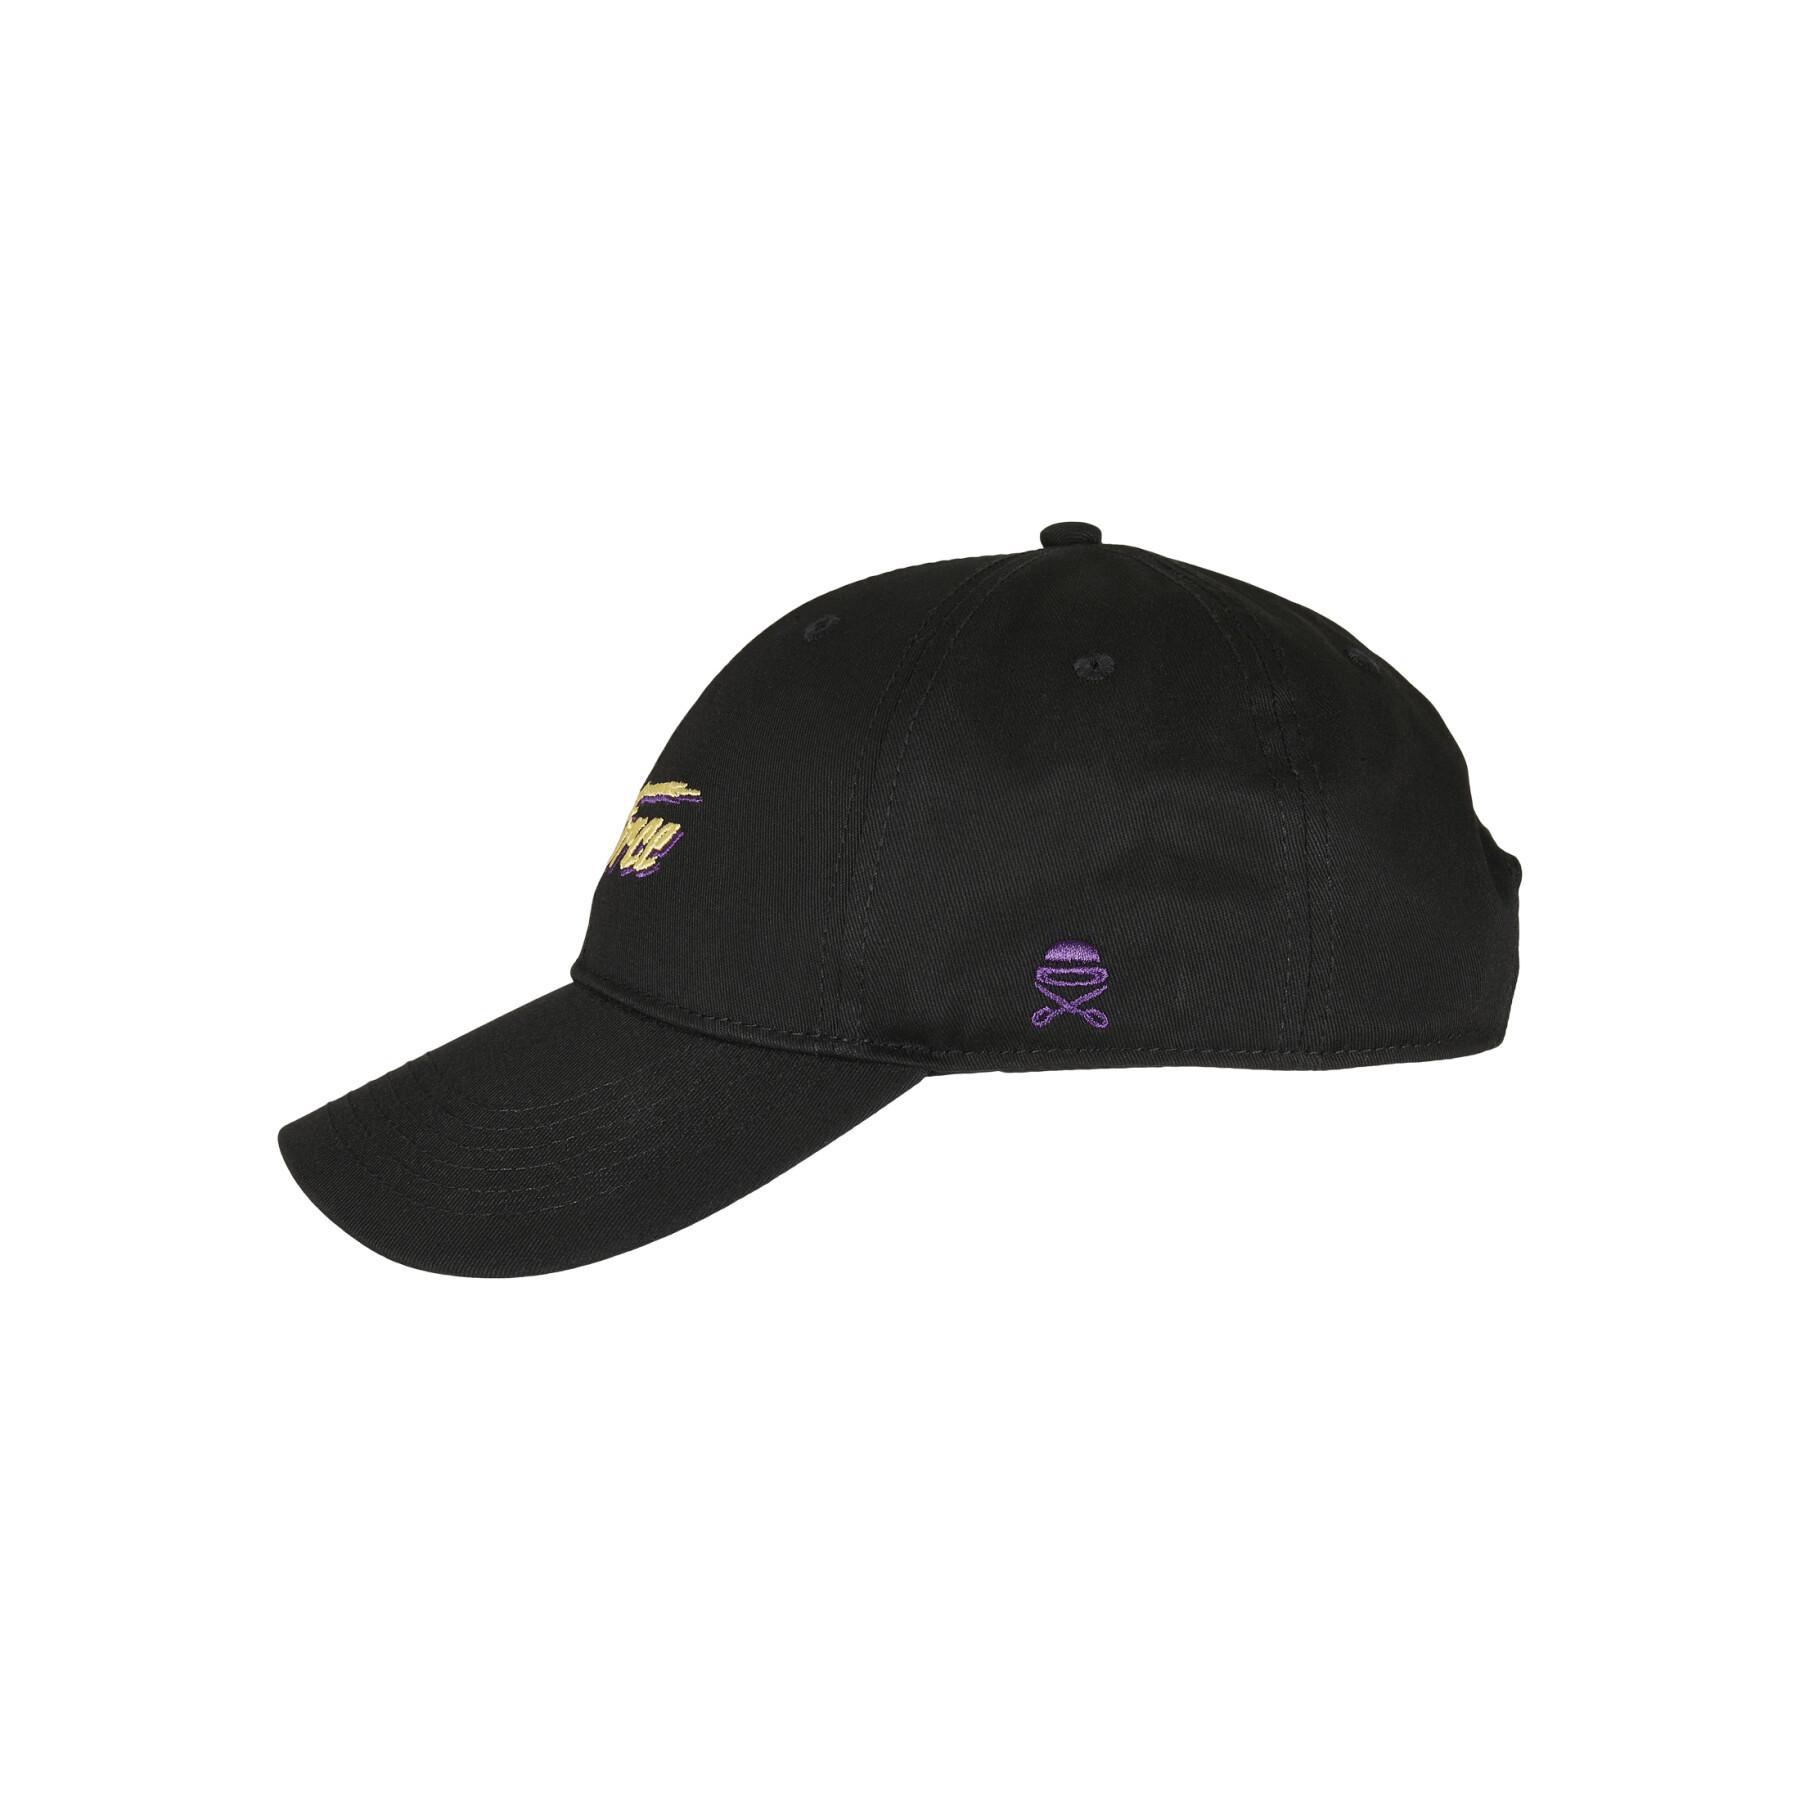 Casquette Cayler & Sons feral force curved